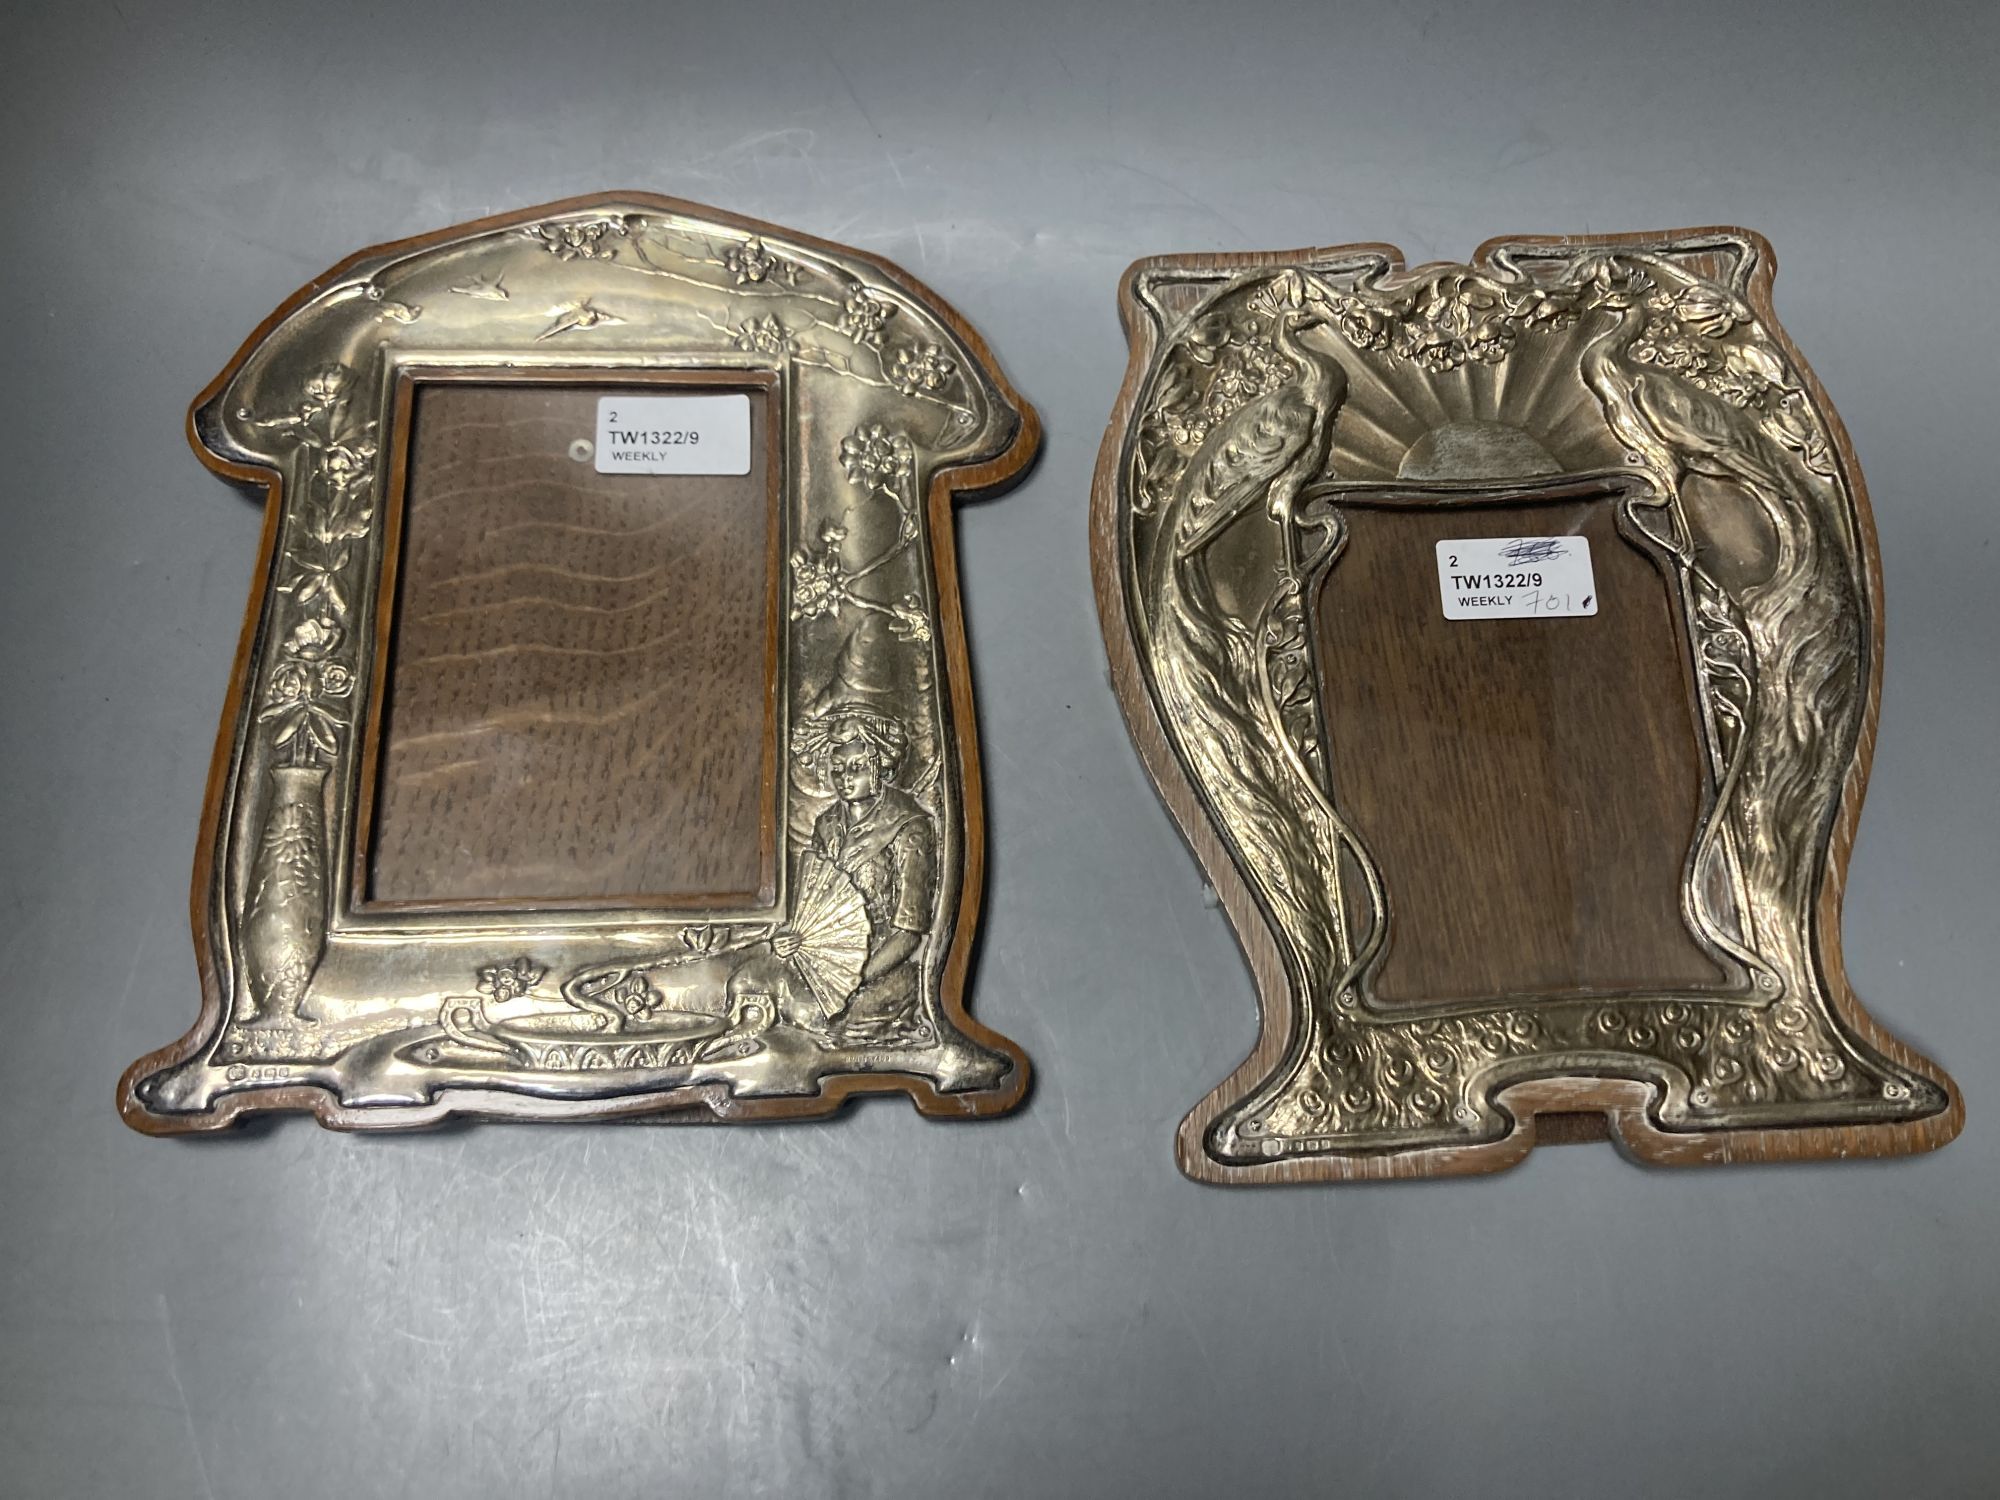 Two Art Nouveau silver-mounted wooden easel photograph frames by Hukin & Heath,